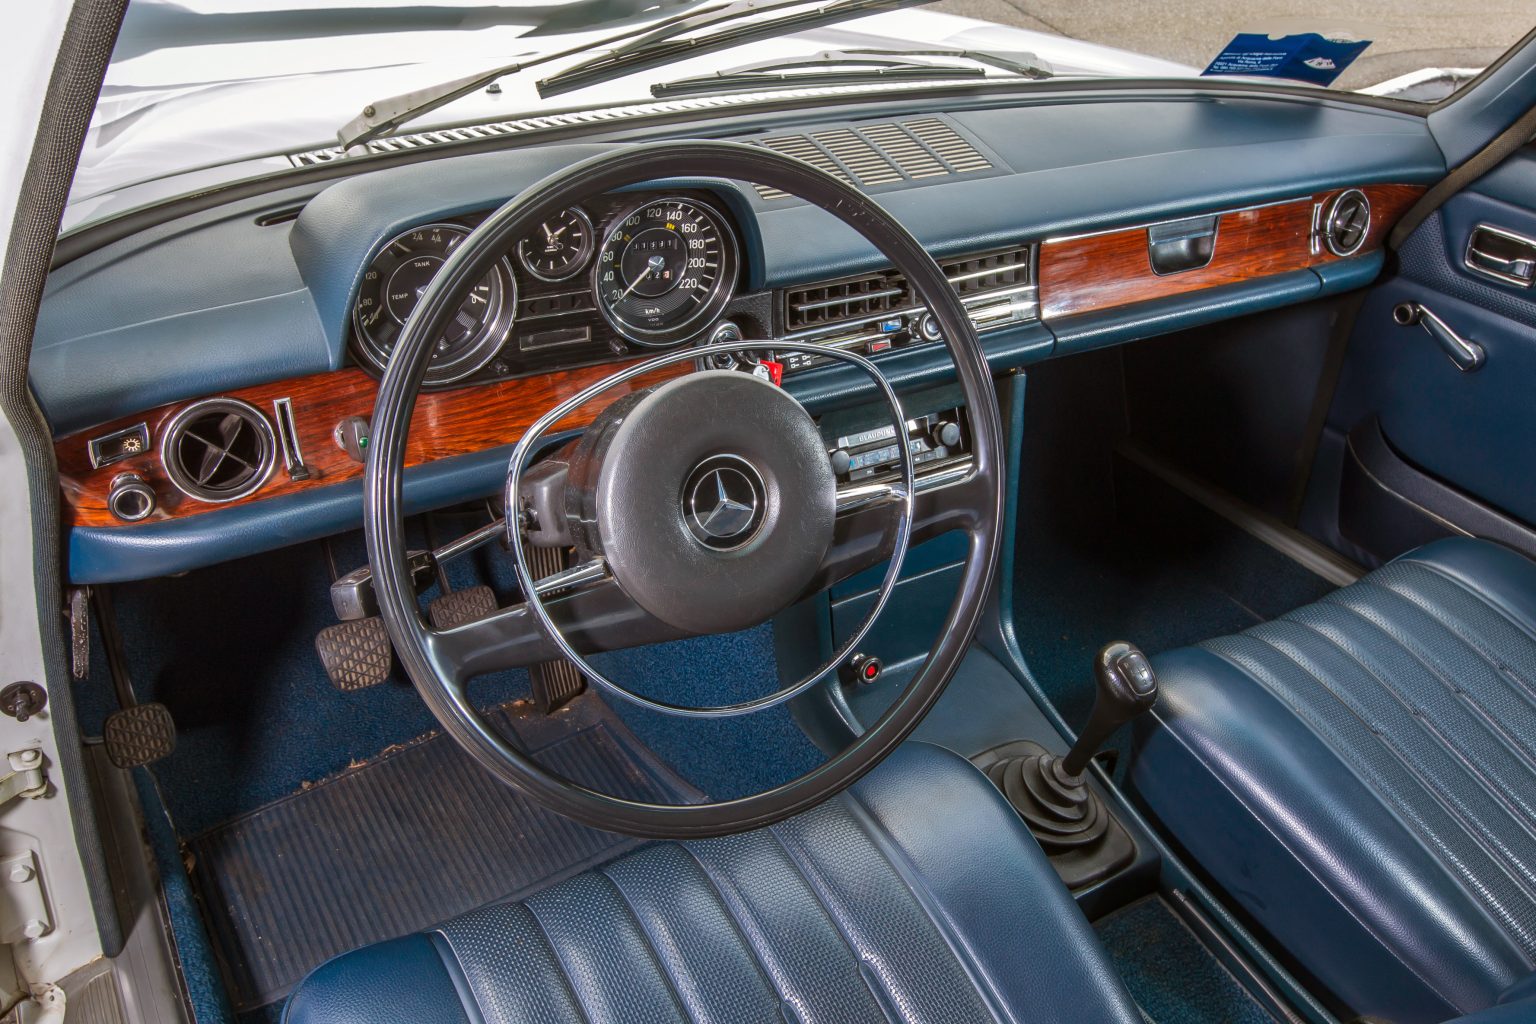 Mercedes-Benz 280 E Stroke/8 W 114 Cockpit. Photo from the Mercedes-Benz Classic Insight “History of the E-Class” from 19 to 22 April 2016.